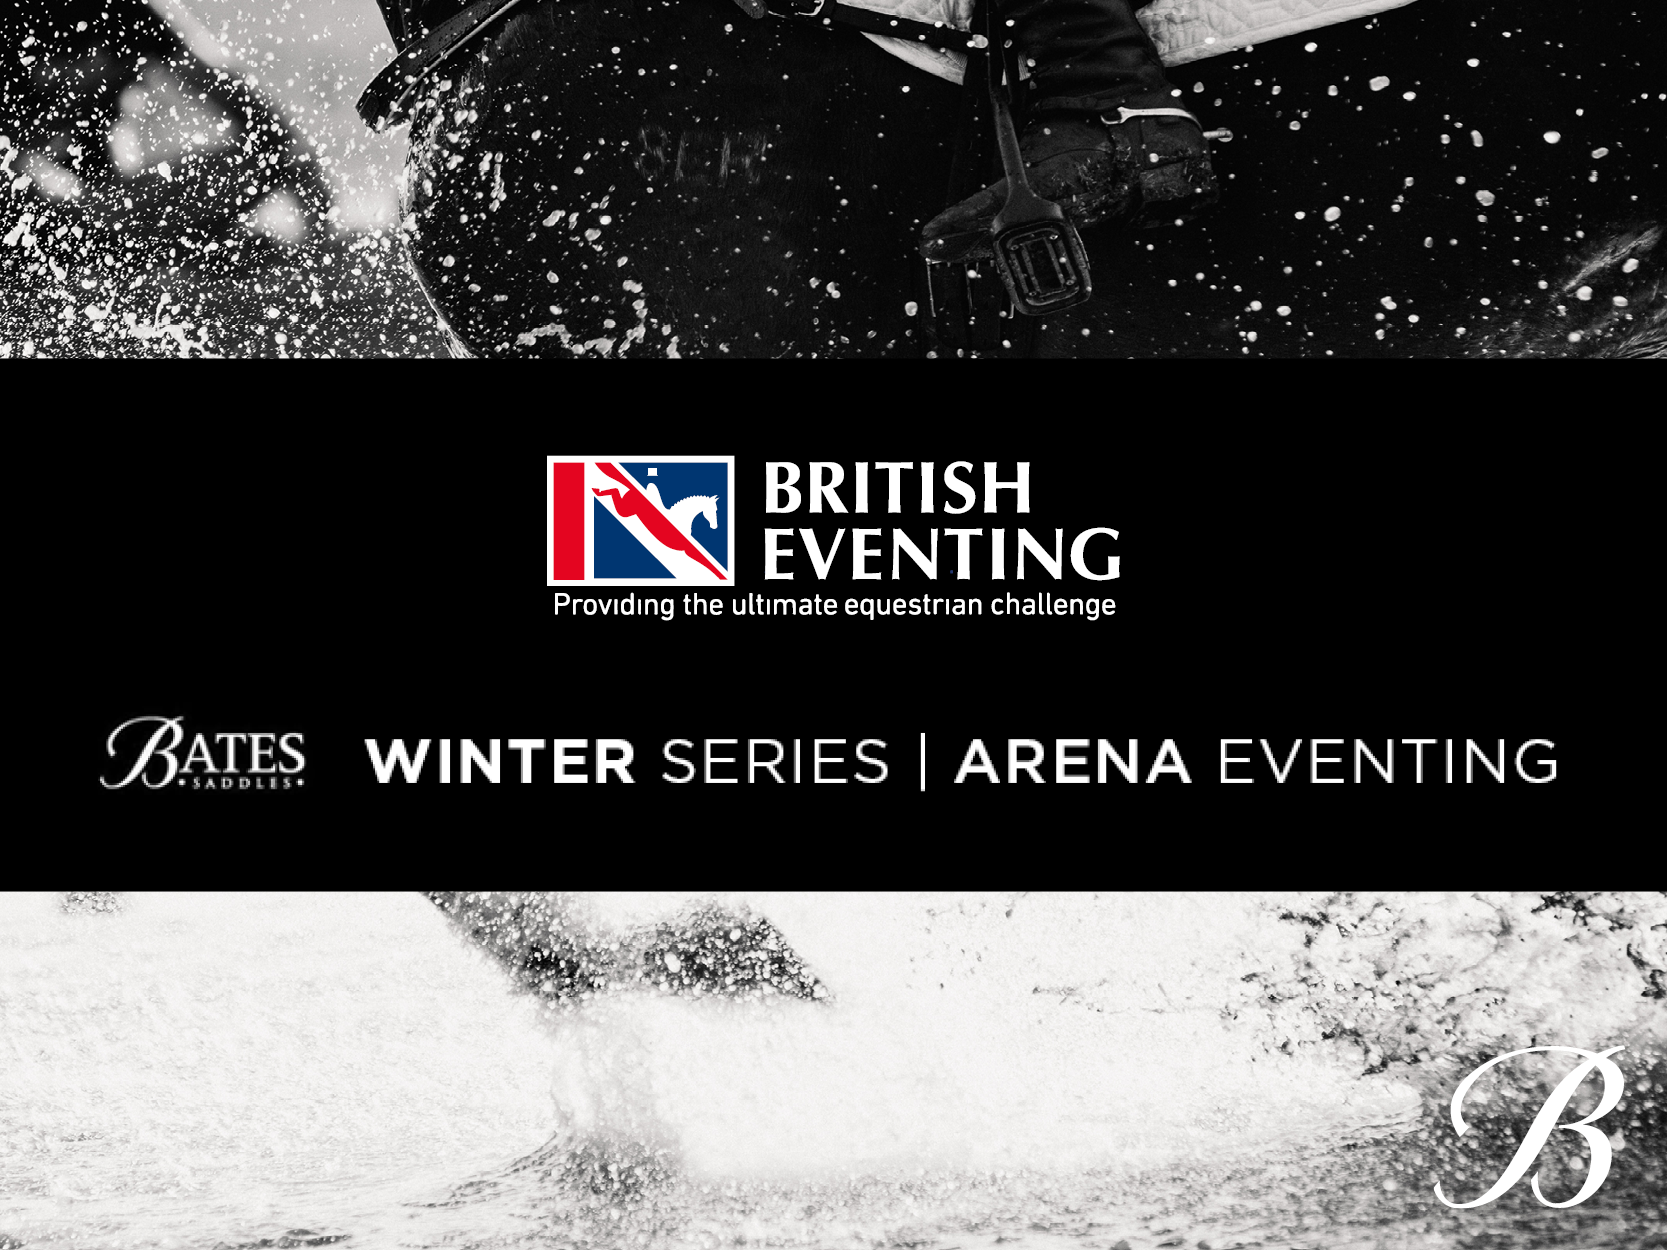 British Eventing announces Bates Saddles as title sponsor of the Arena Eventing Championships